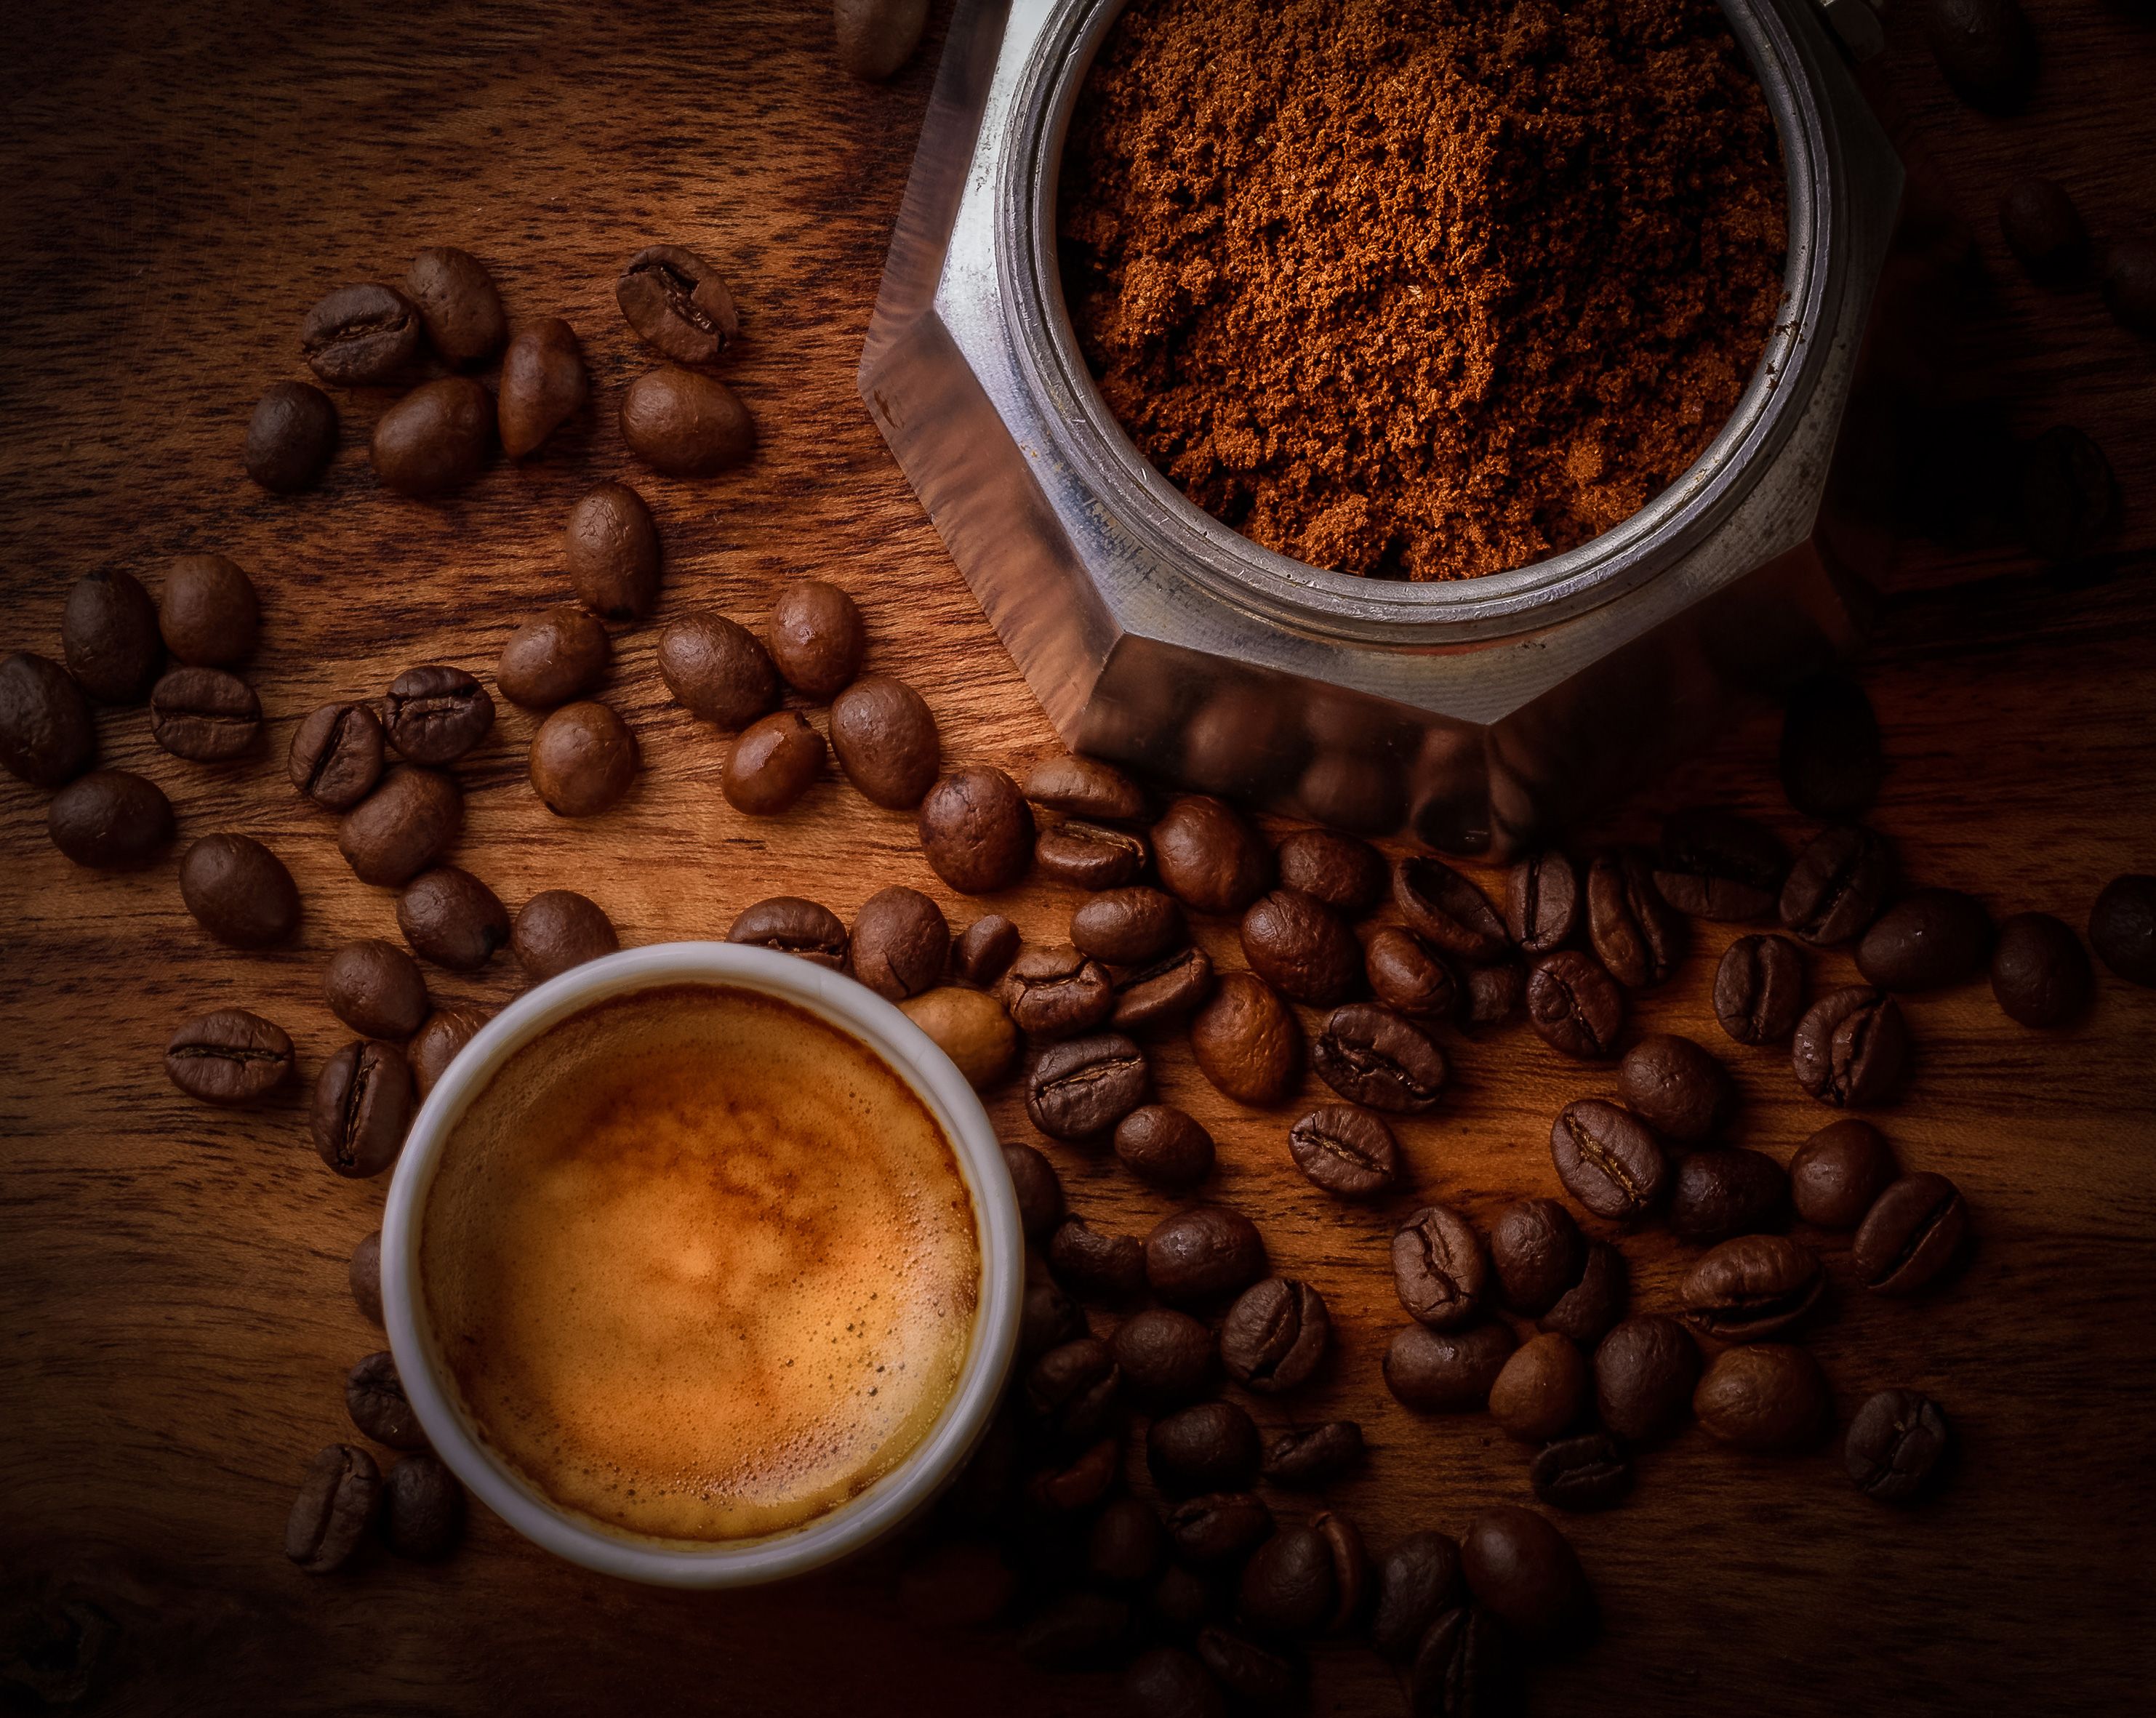 Coffee Beside Coffee Beans, HD Food, 4k Wallpaper, Image, Background, Photo and Picture